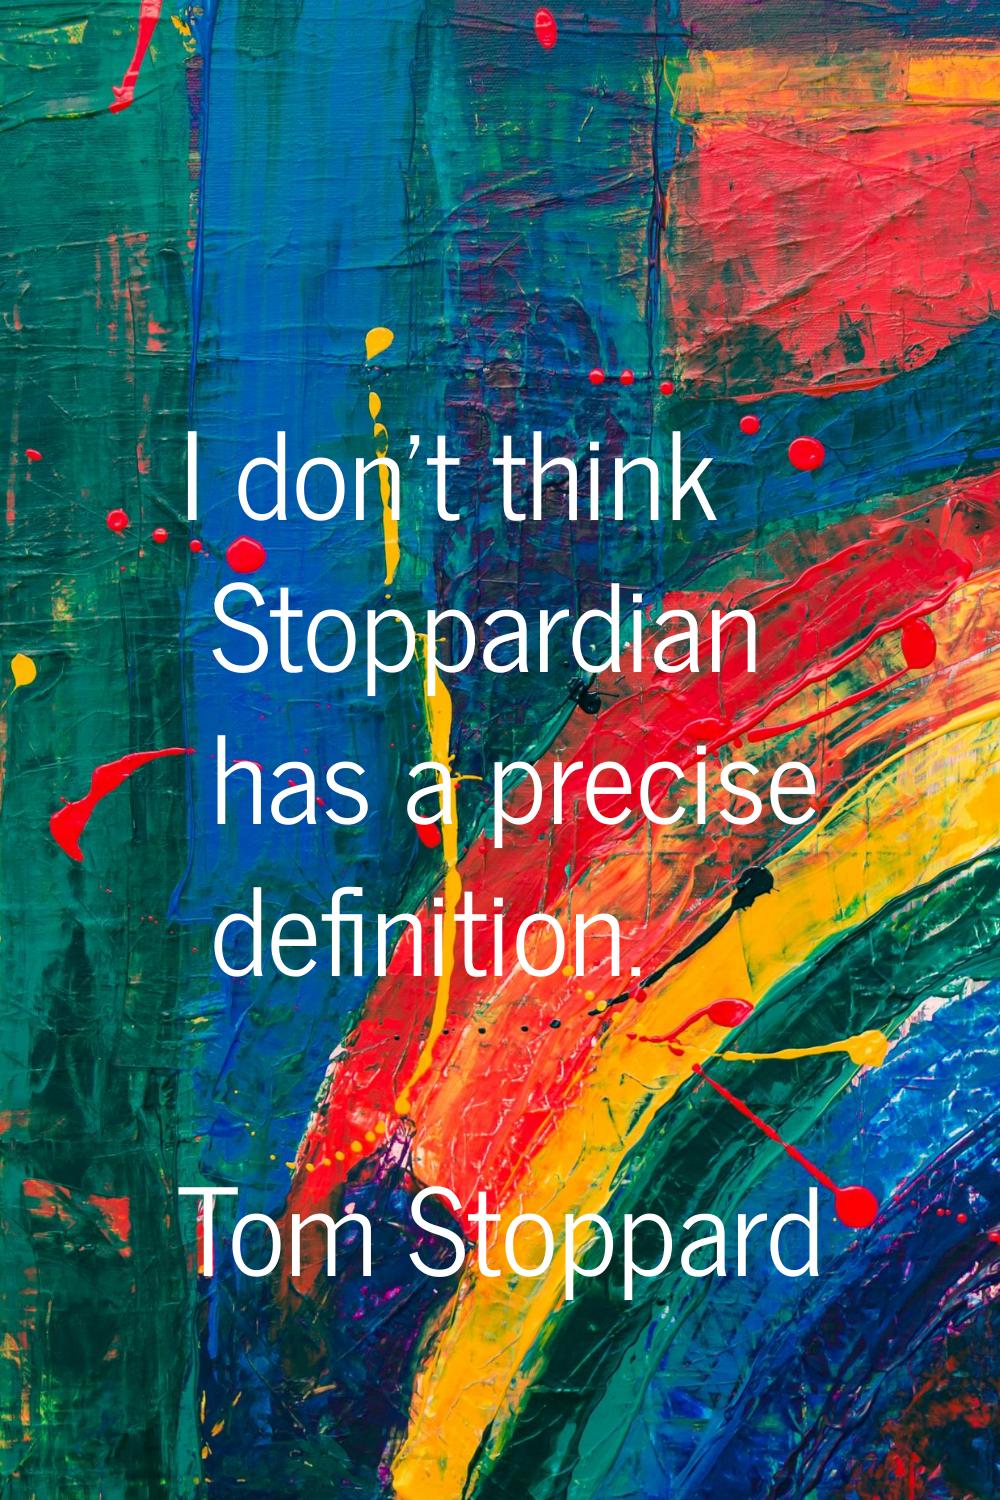 I don't think Stoppardian has a precise definition.